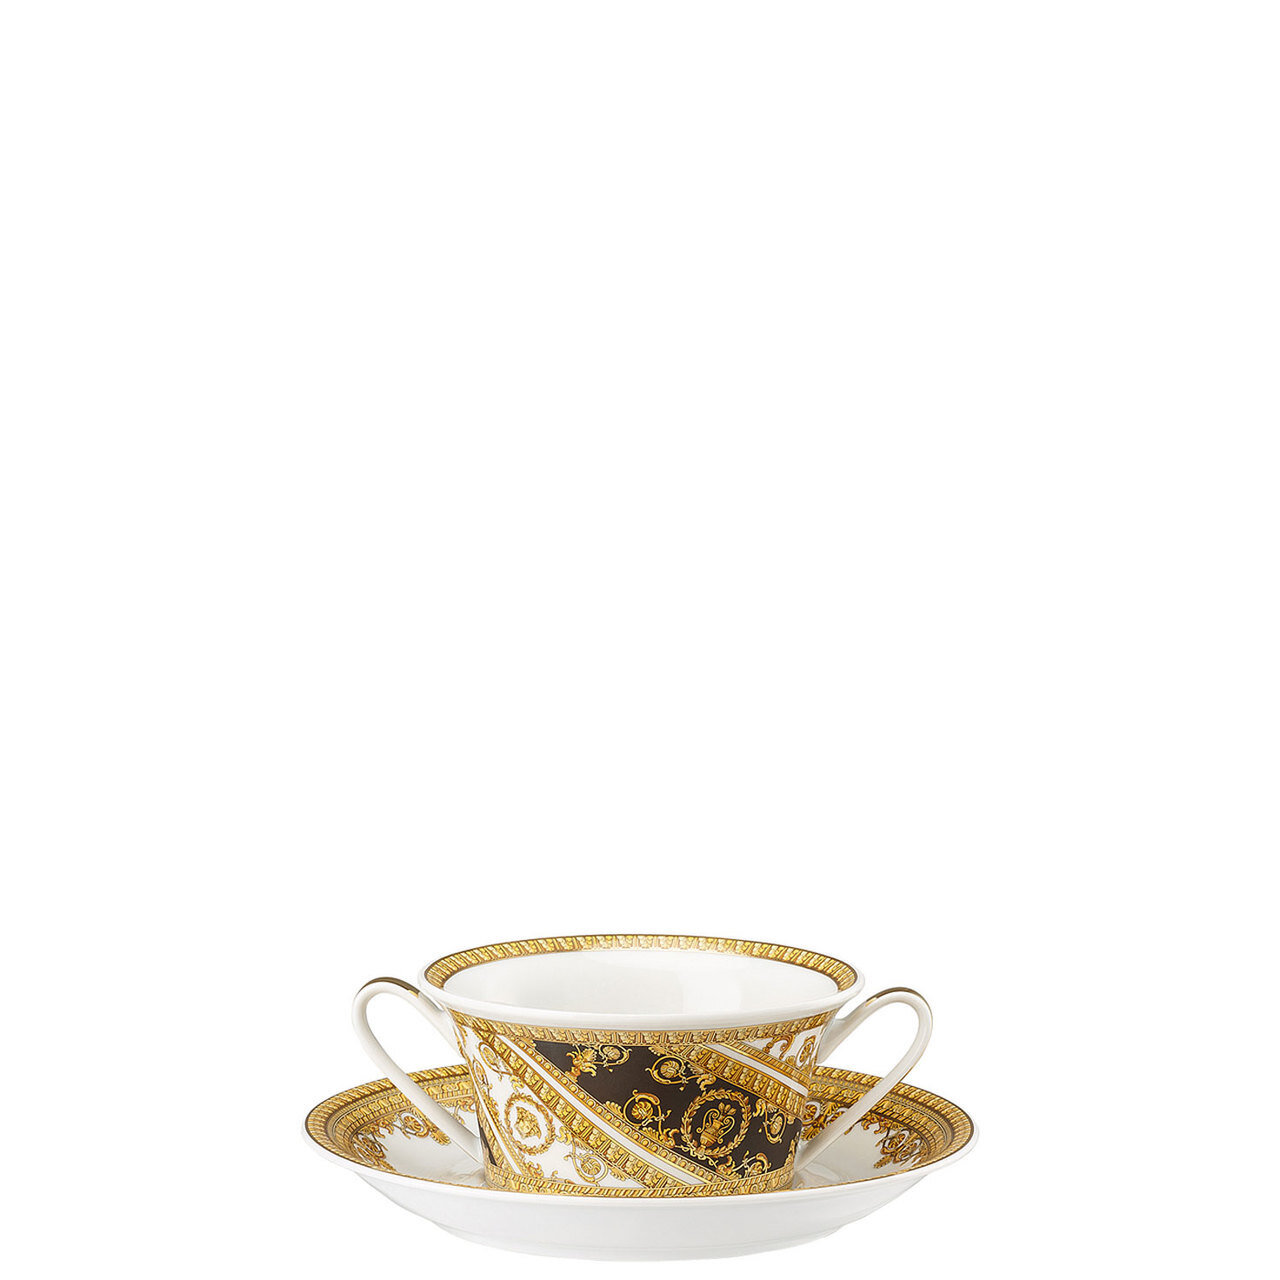 Versace I Love Baroque Cream Soup Cup and Saucer 6 3/4 Inch